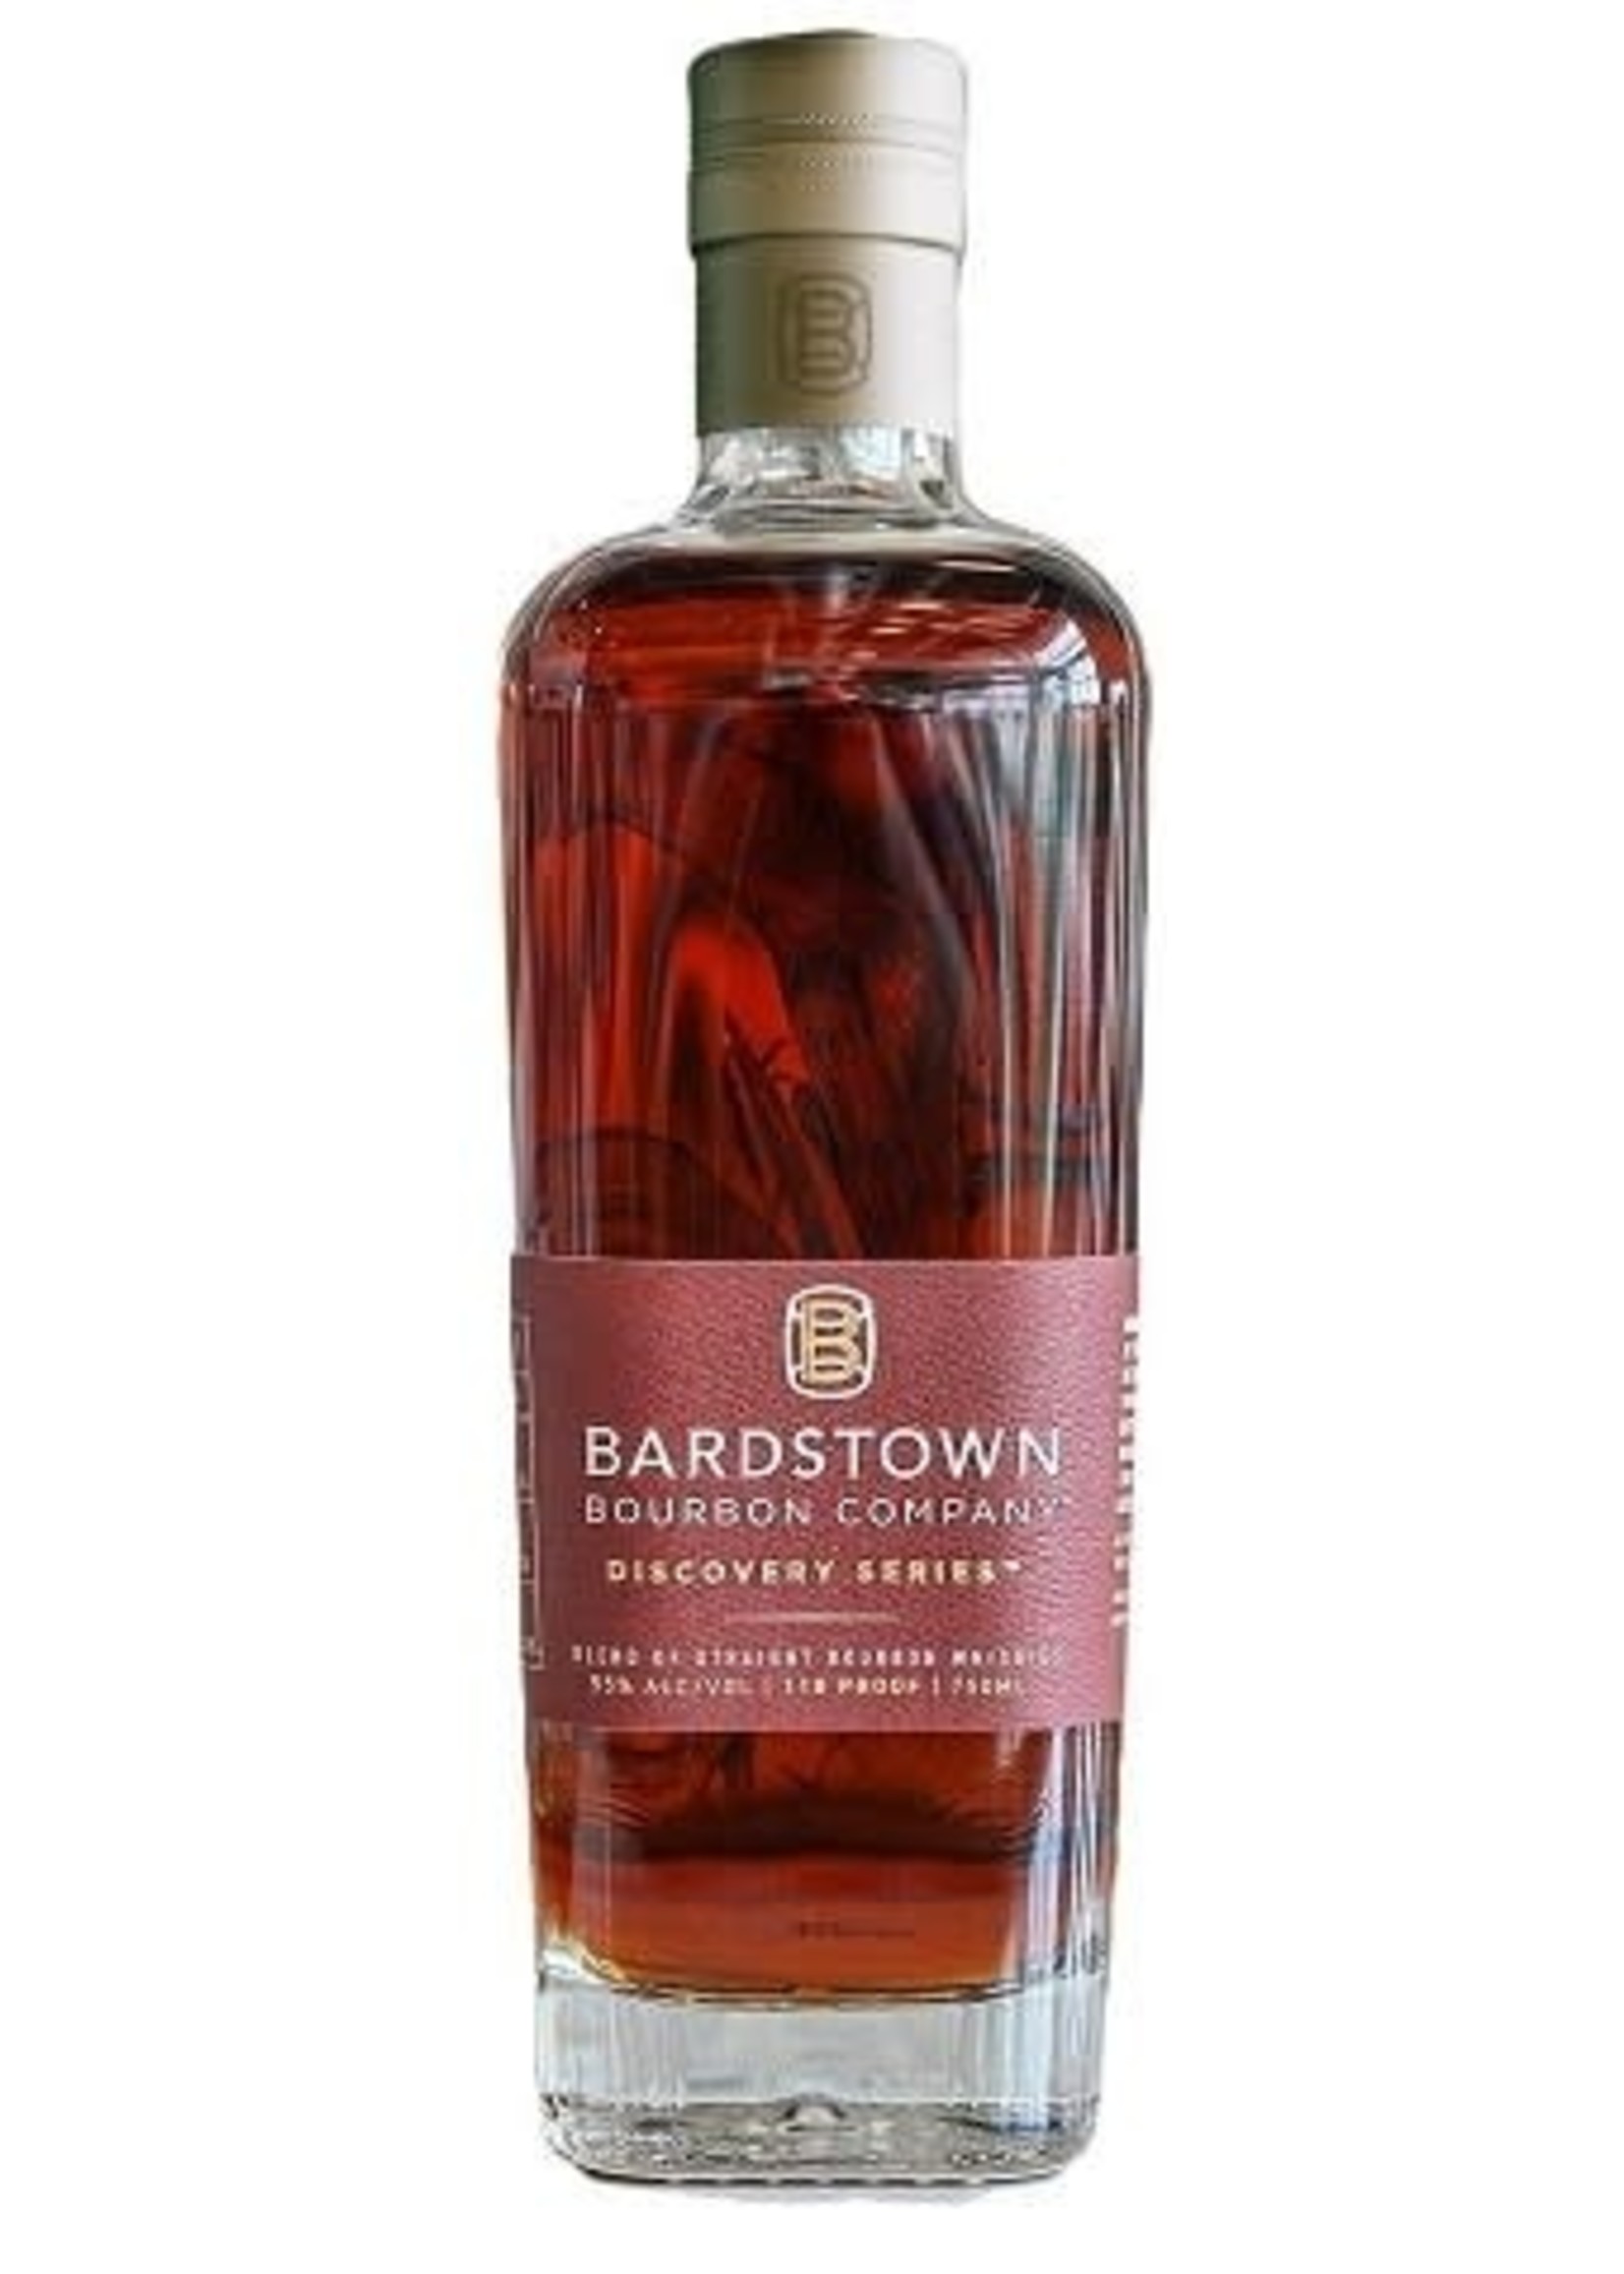 Bardstown Bourbon Company Bardstown / Discovery Series #6 Cask Strength Blend Of Straight Bourbon Whiskies / 750mL